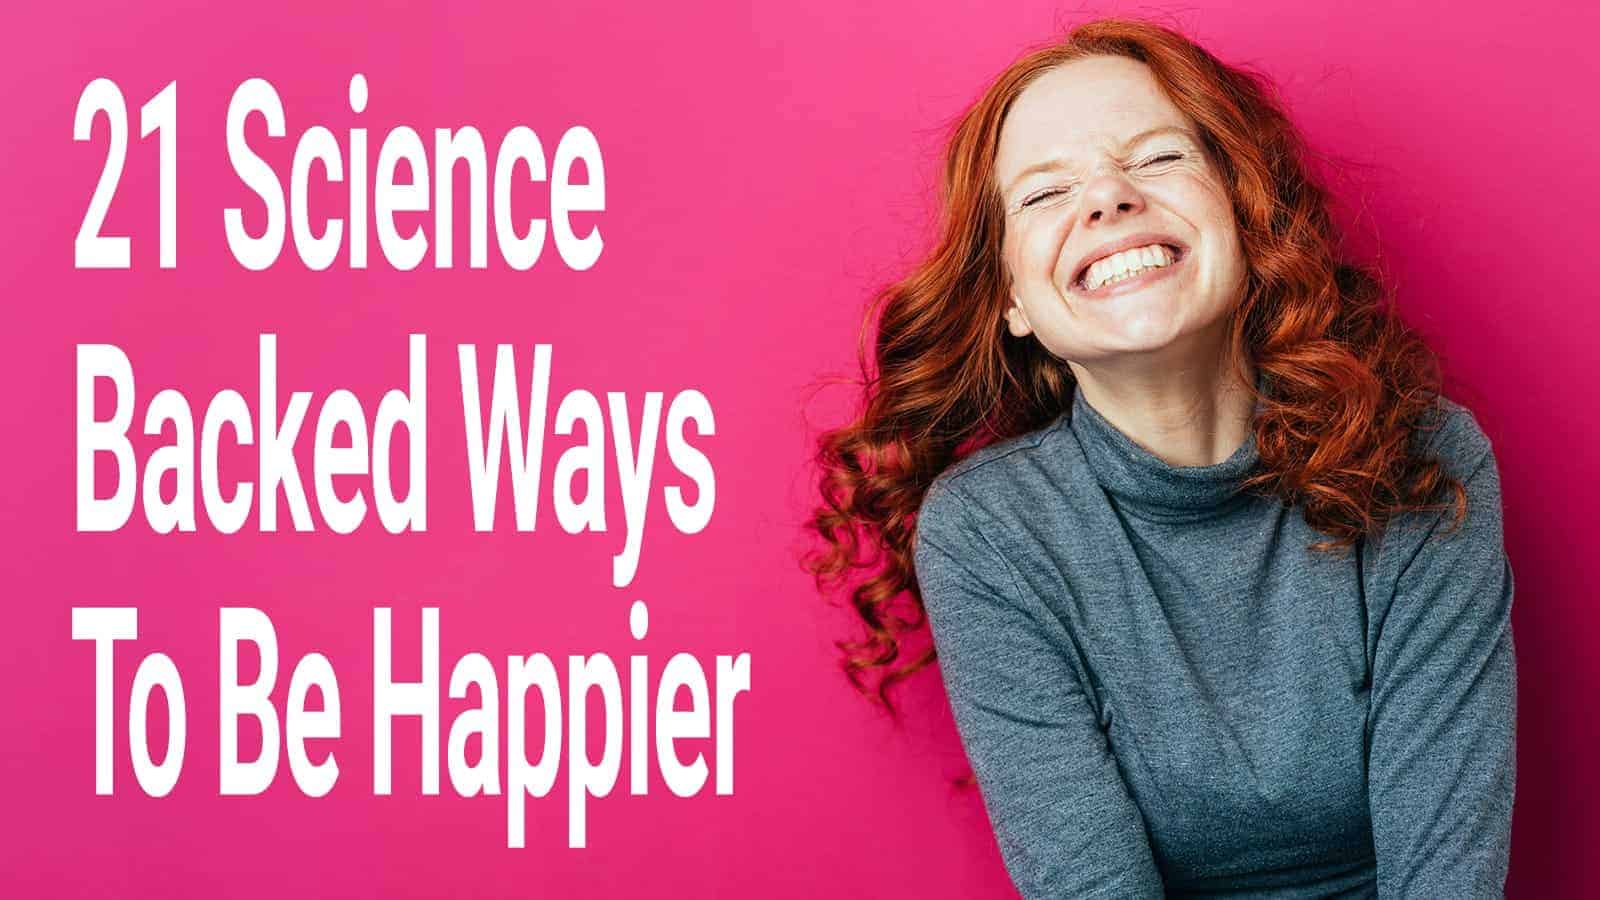 21 Science Backed Ways To Be Happier